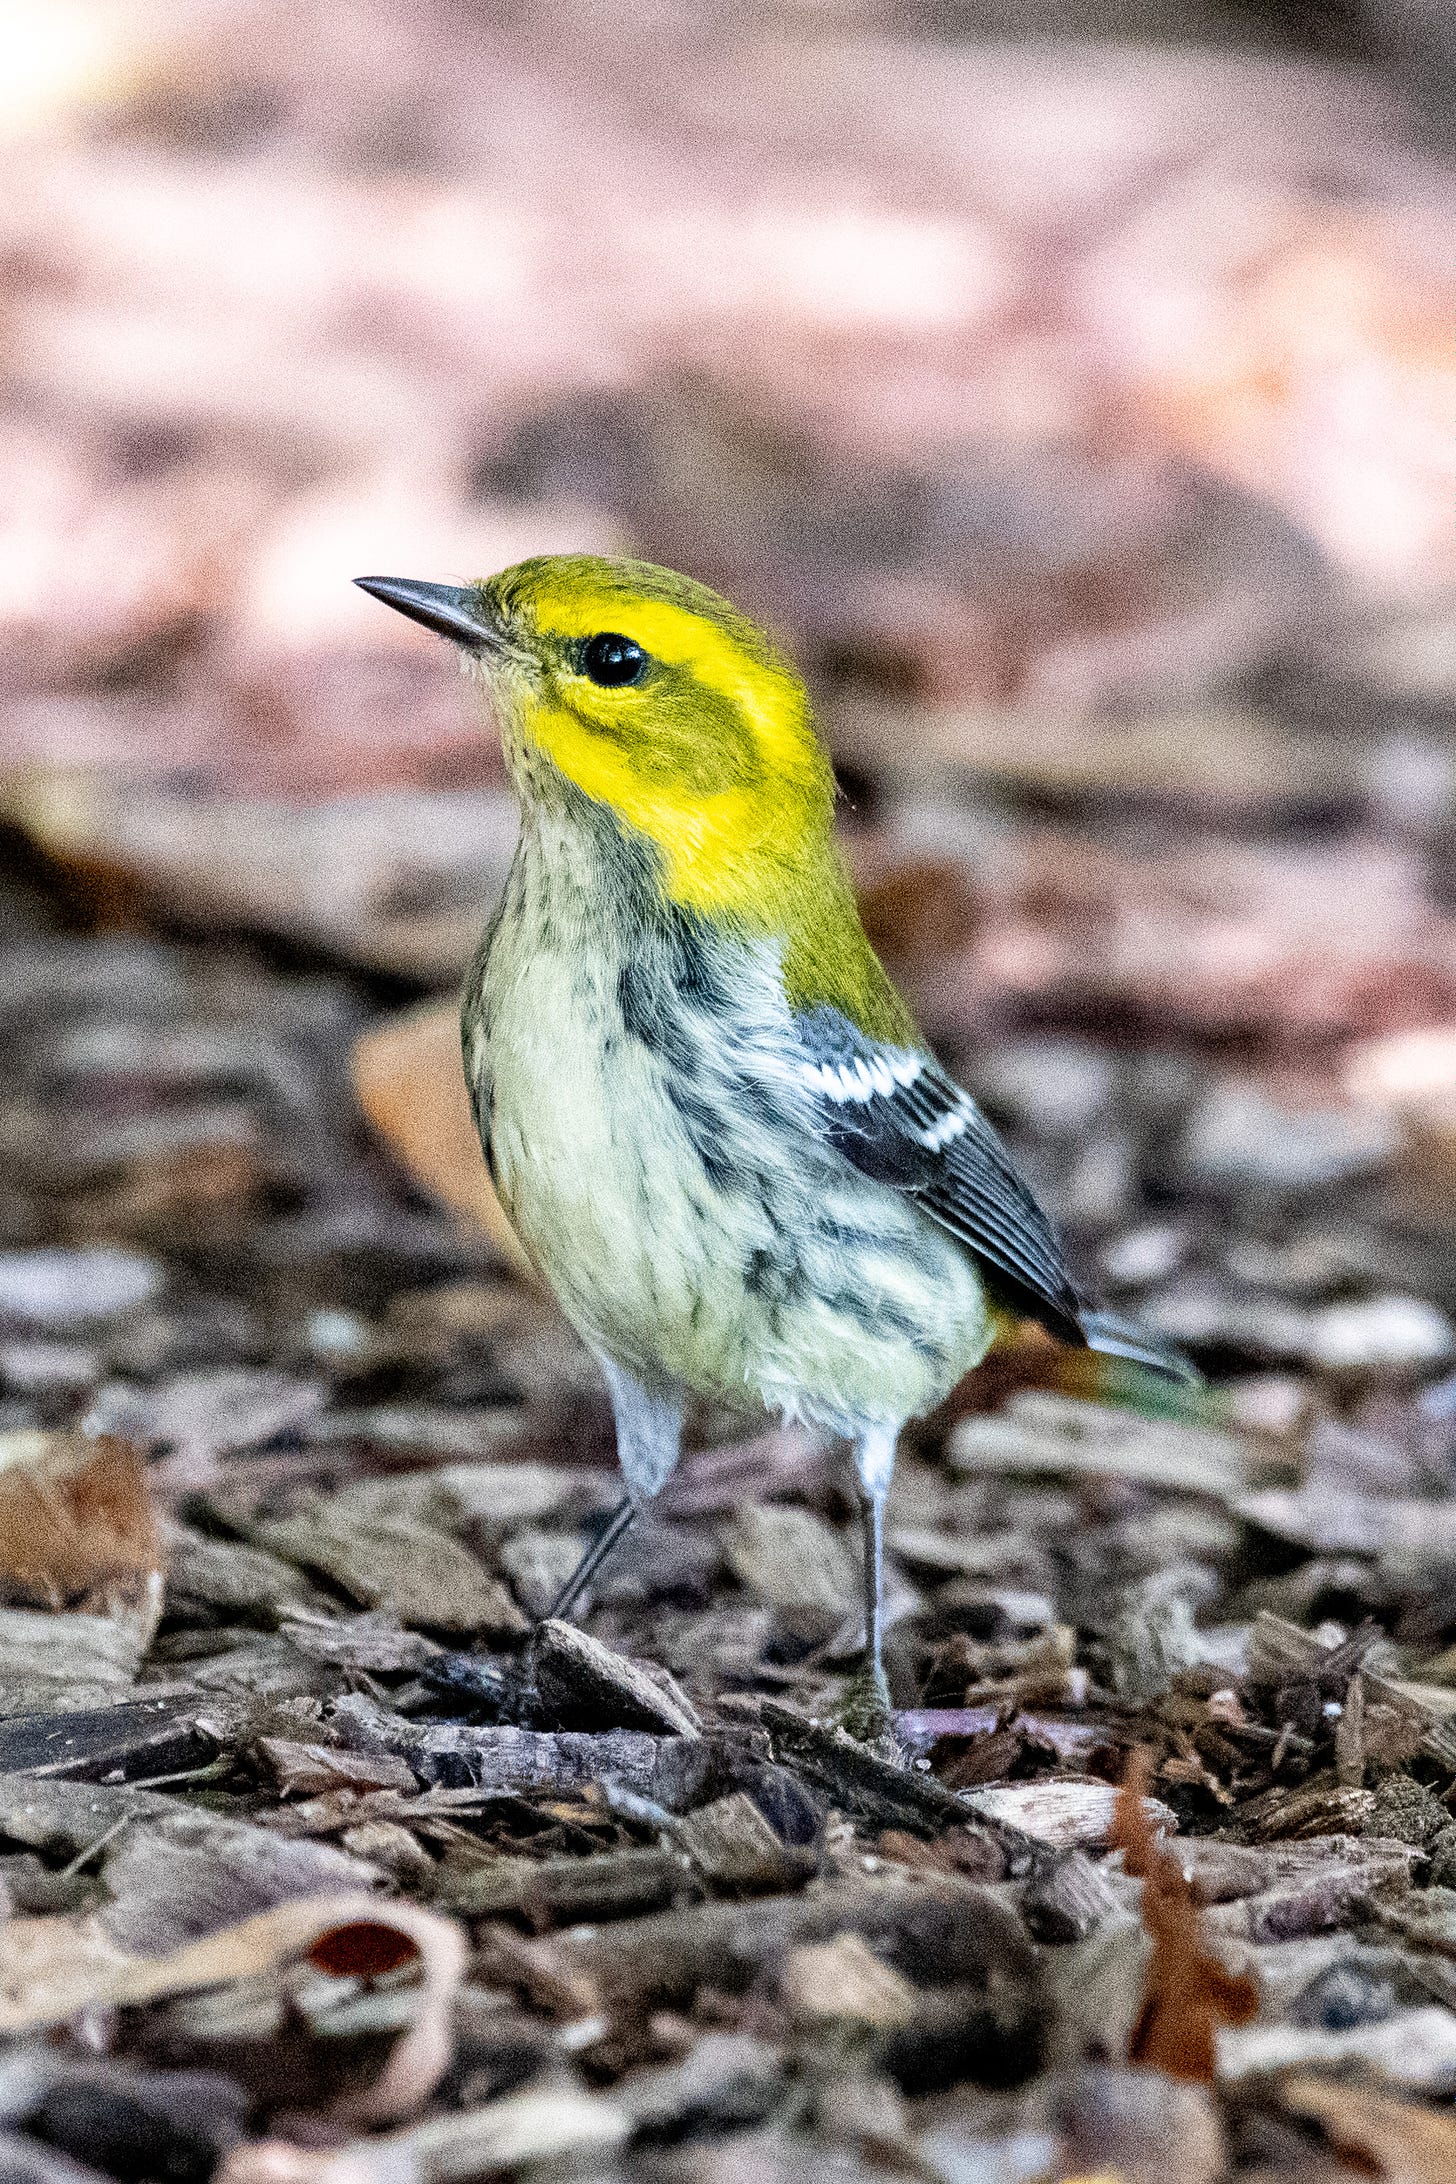 A black-throated green warbler, a small bird with a bright chartreuse head, with gray masking, and a white breast with gray streaks, stands very tall and alone on wood debris